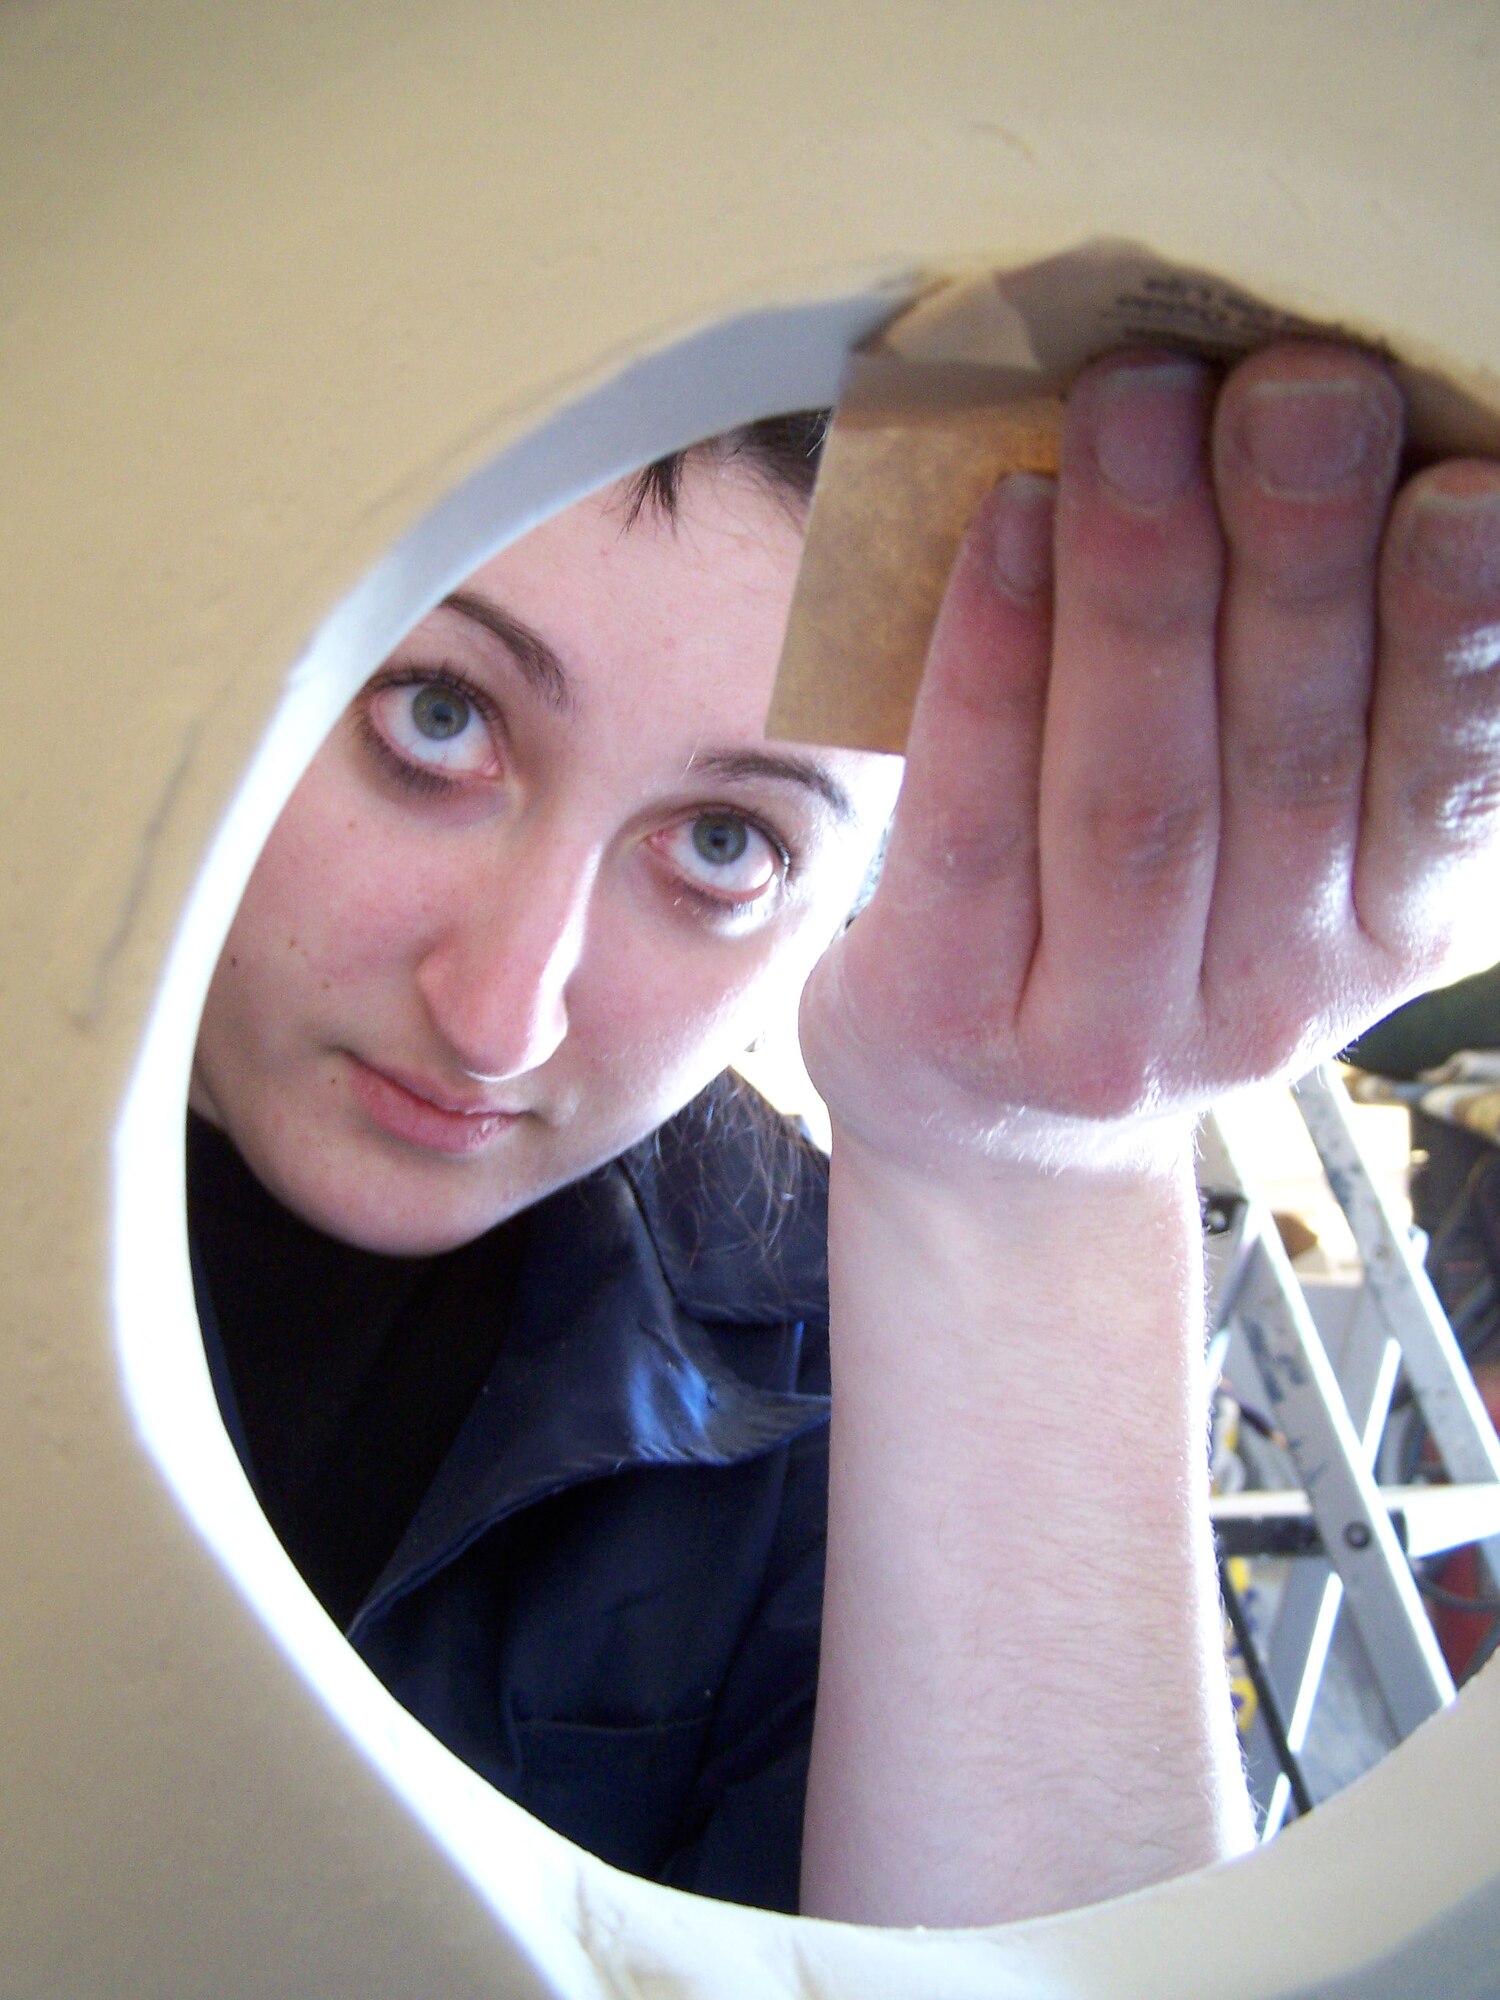 Senior Airman Christy Cadle sands the inside of a porceline light fixture in a home being restored in Bay St. Louis, Miss. The home was damaged by Hurricane Katrina more than a year ago. Airman Cadle is a maintenance specialist assigned to the 354th Aircraft Maintenance Squadron from Eielson Air Force Base, Alaska. She was one of five Airmen who travelled from Eielson AFB to the Gulf coast to repair Hurricane Katrina-damaged homes. (U.S. Air Force photo/Senior Airman Anthony Nelson)
